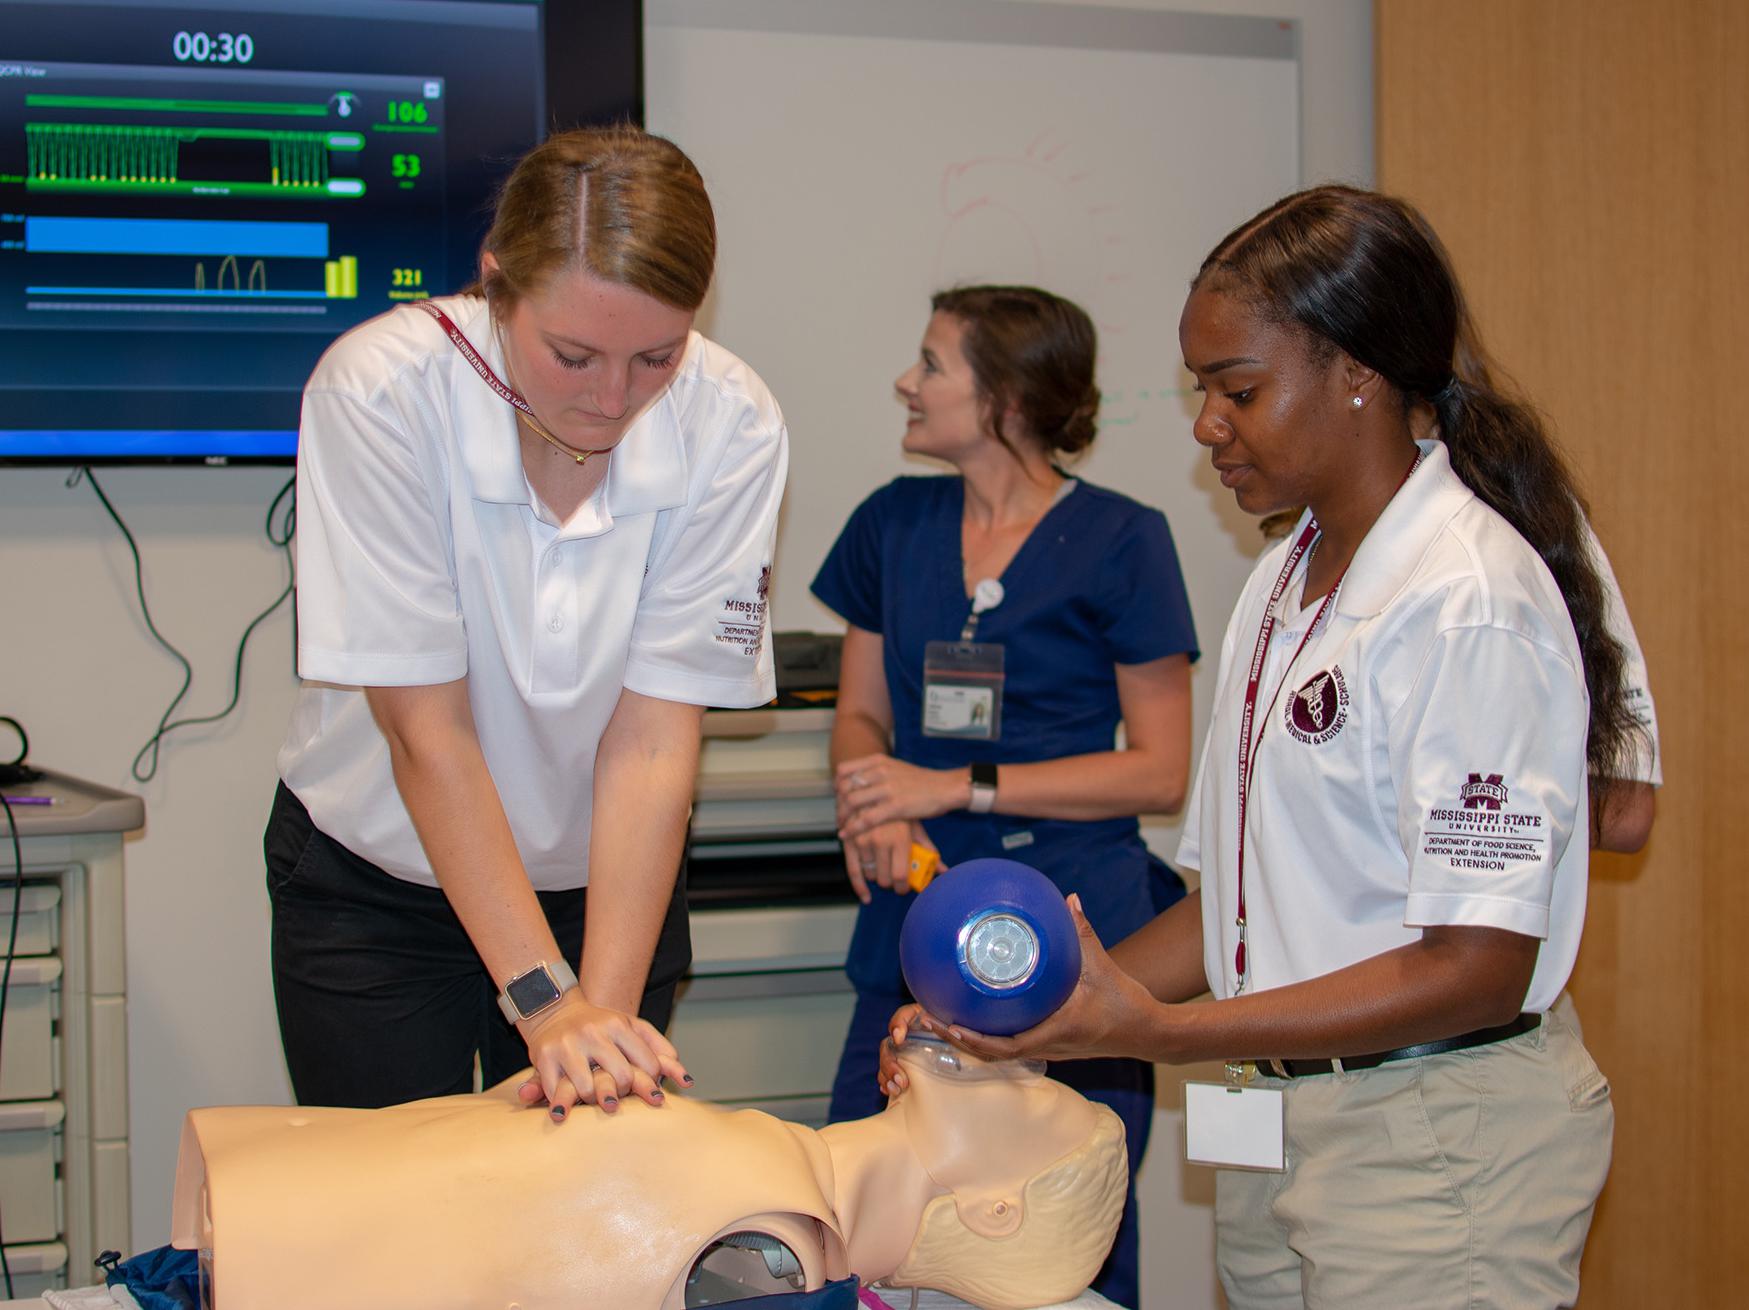 One teenager clasps both of her hands to press on a training manikin’s chest, while another female student holds a ventilator mask over its face. A nurse in the background watches a large wall-mounted monitor.